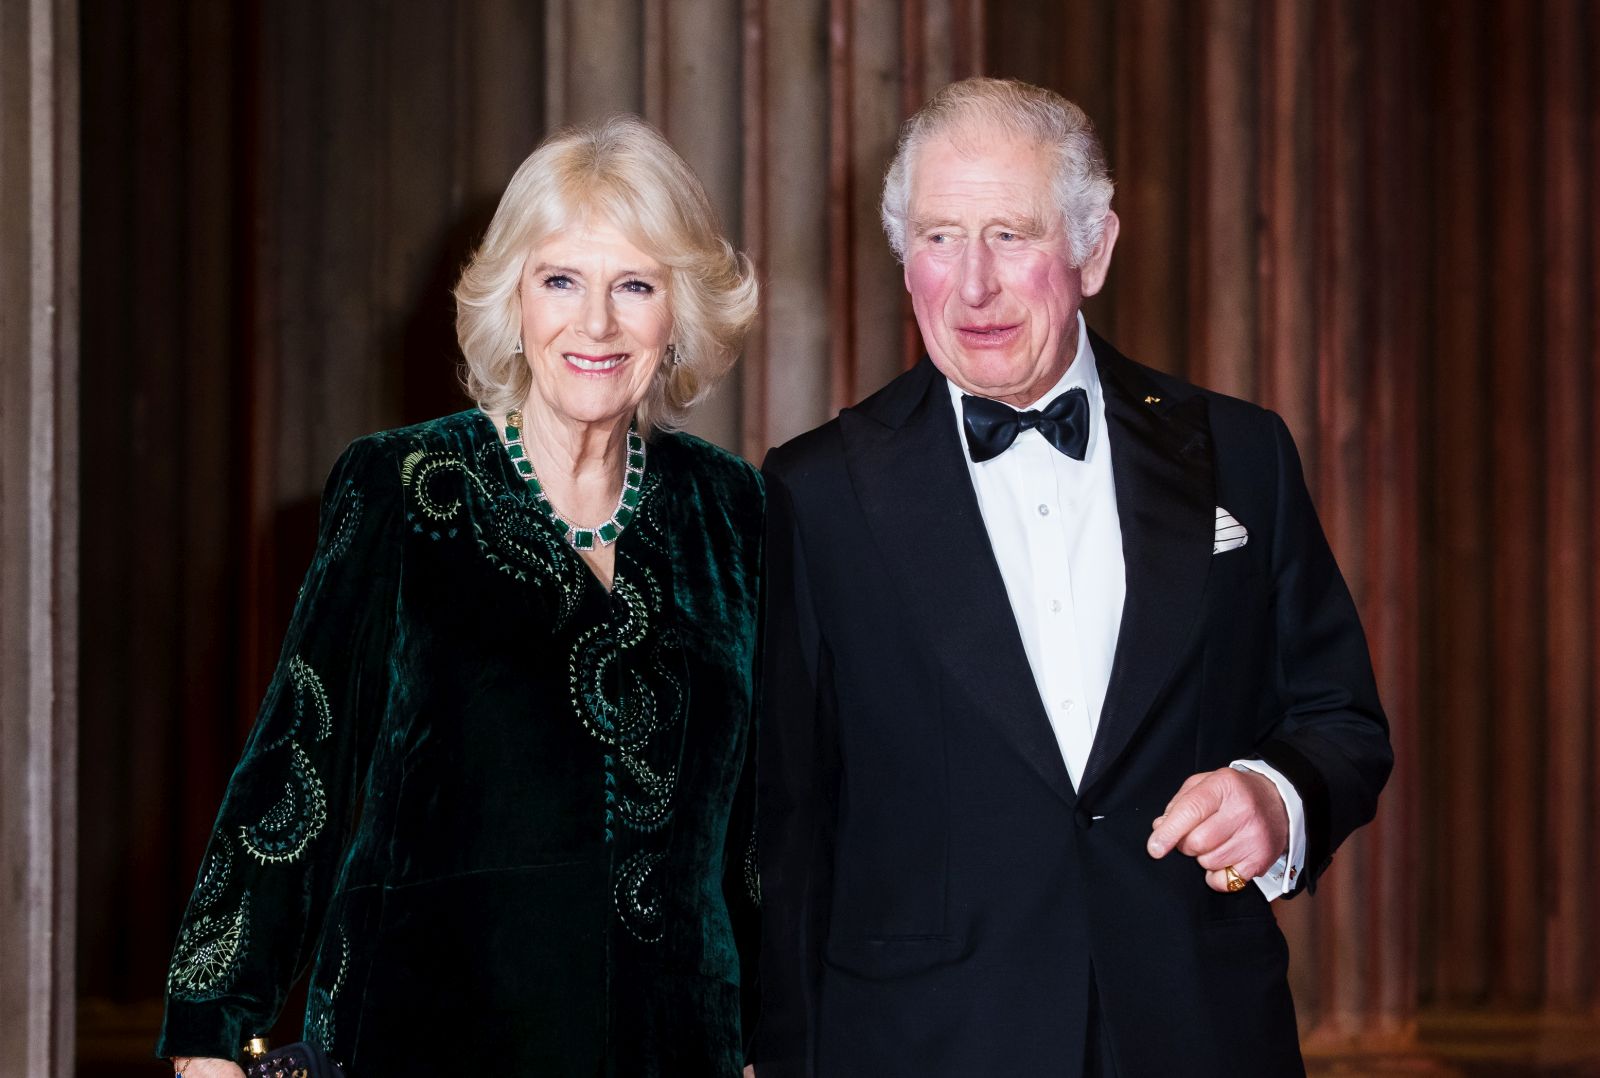 epa09741806 Britain’s Charles, Prince of Wales (R) and Camilla, Duchess of Cornwall (L) arrive for the British Asian Trust Reception at the British Museum in London, Britain, 09 February 2022. The Prince of Wales founded the British Asian Trust in 2007, alongside a group of British-Asian business leaders. The charity works to reduce poverty and disadvantage for communities in South Asia.  EPA/VICKIE FLORES